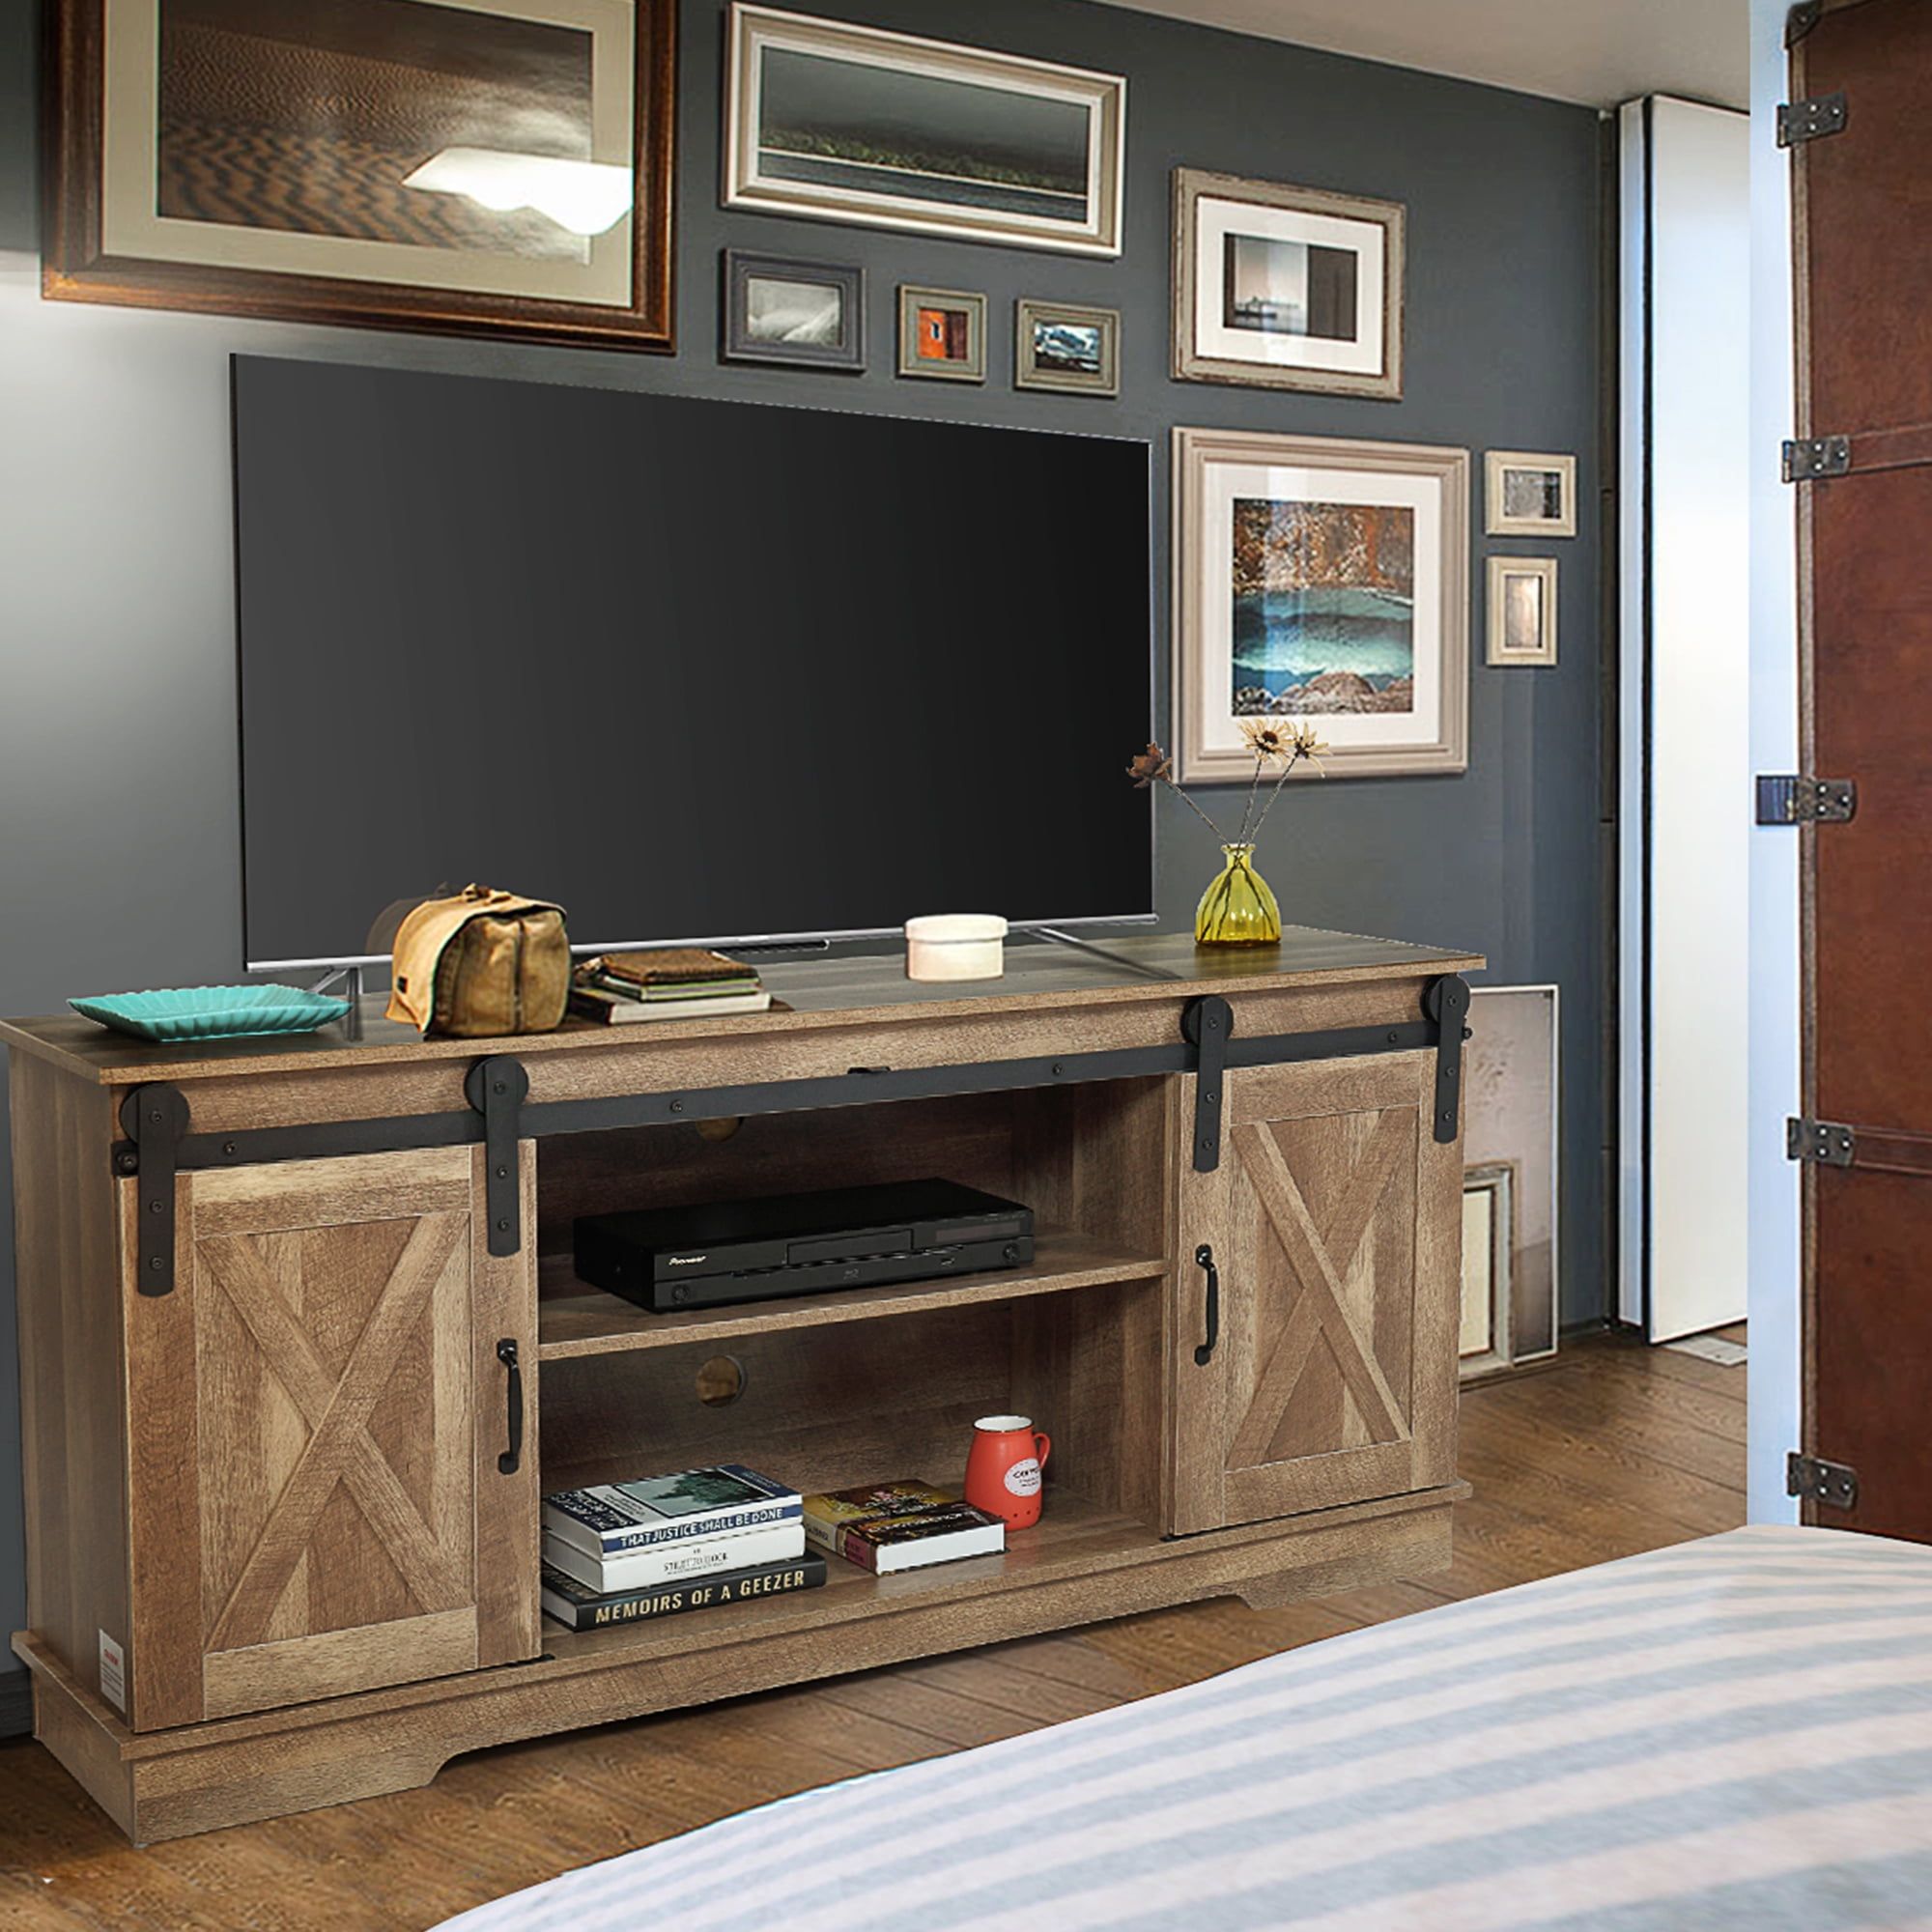 Jaxpety Wooden Tv Stand With Sliding Barn Door For 65''tvs, Farmhouse Throughout Farmhouse Tv Stands (View 15 of 20)